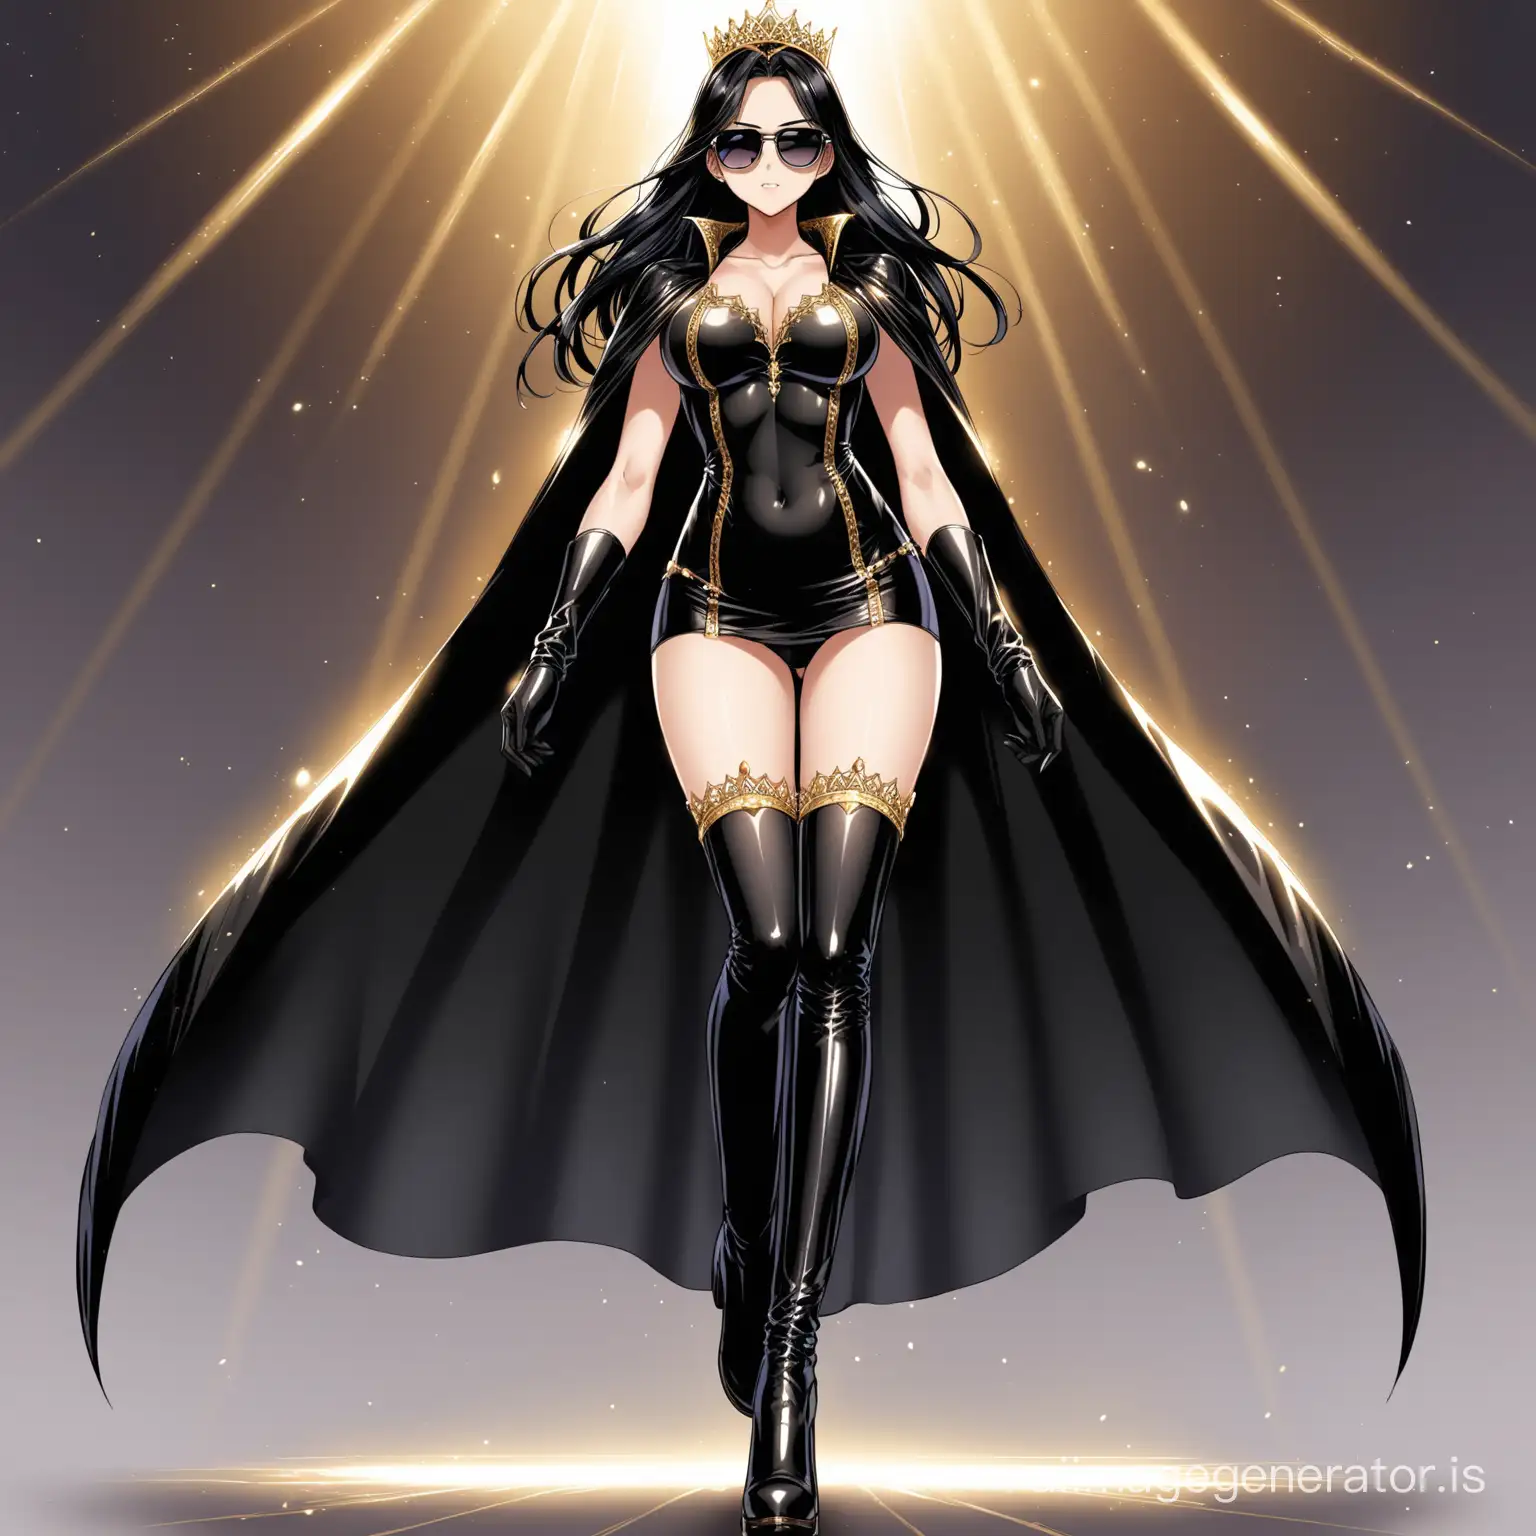 Anime-Princess-in-Black-Leather-Outfit-with-Tiara